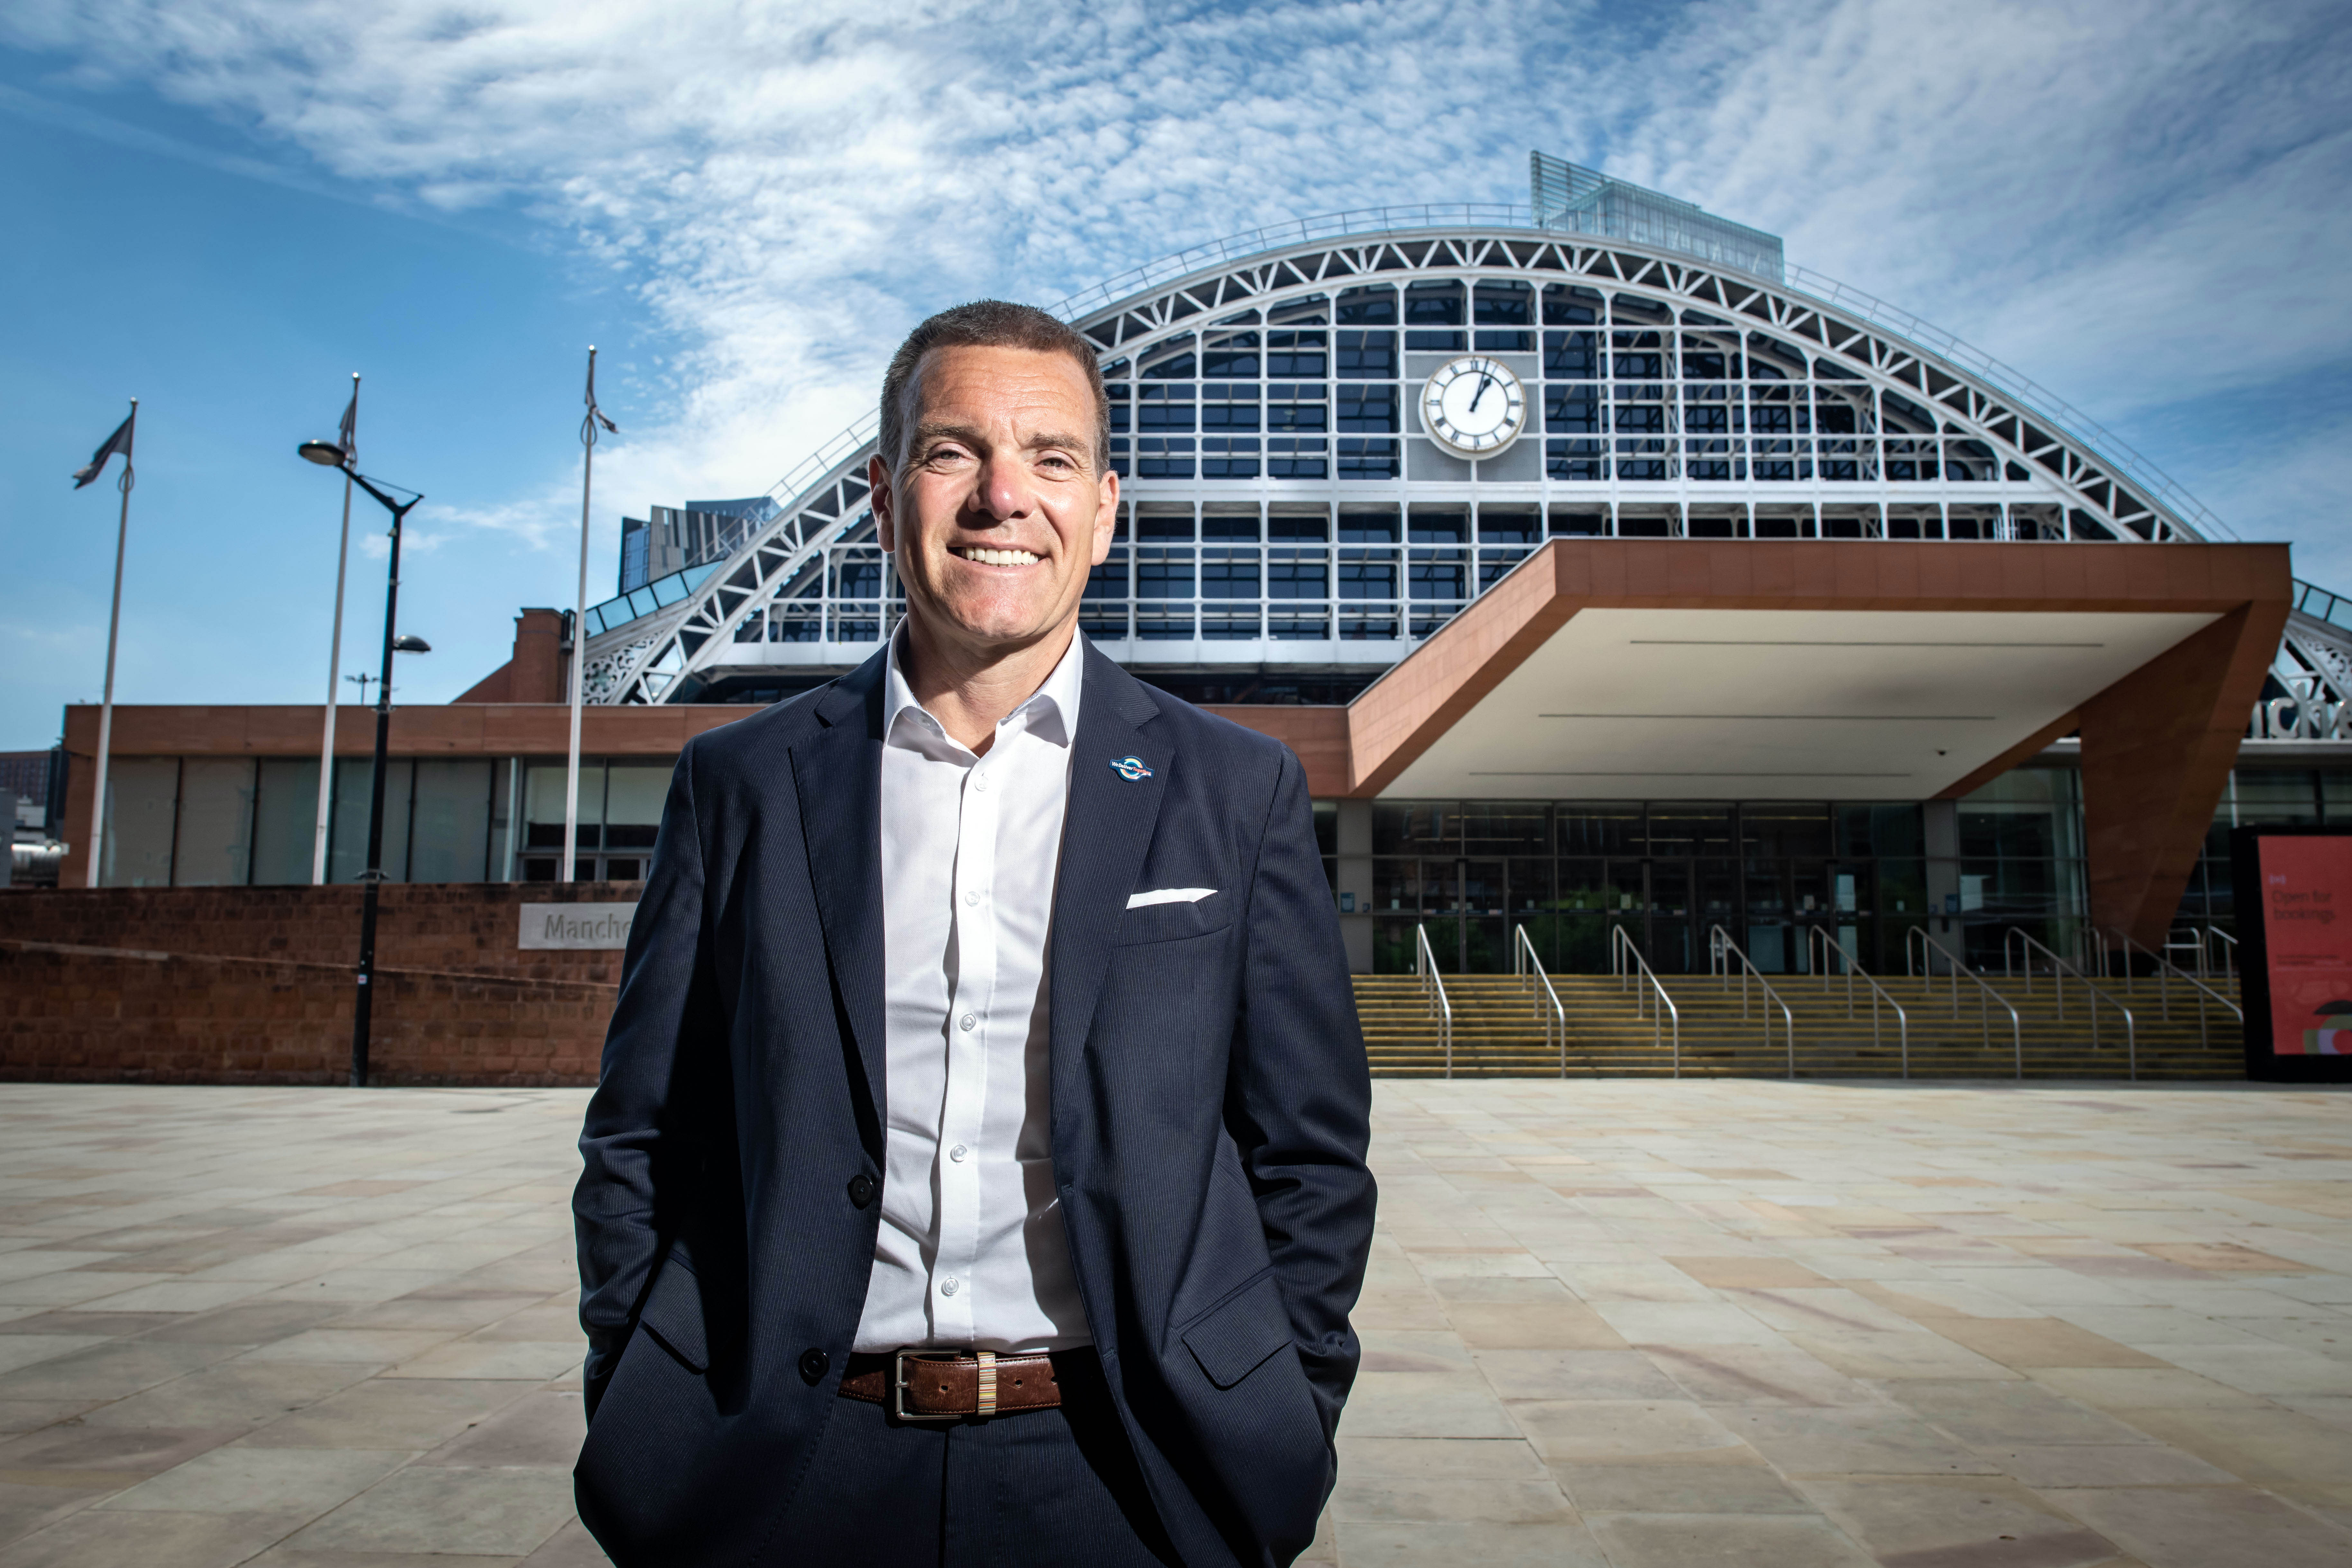 Shaun Hinds, CEO, Manchester Central